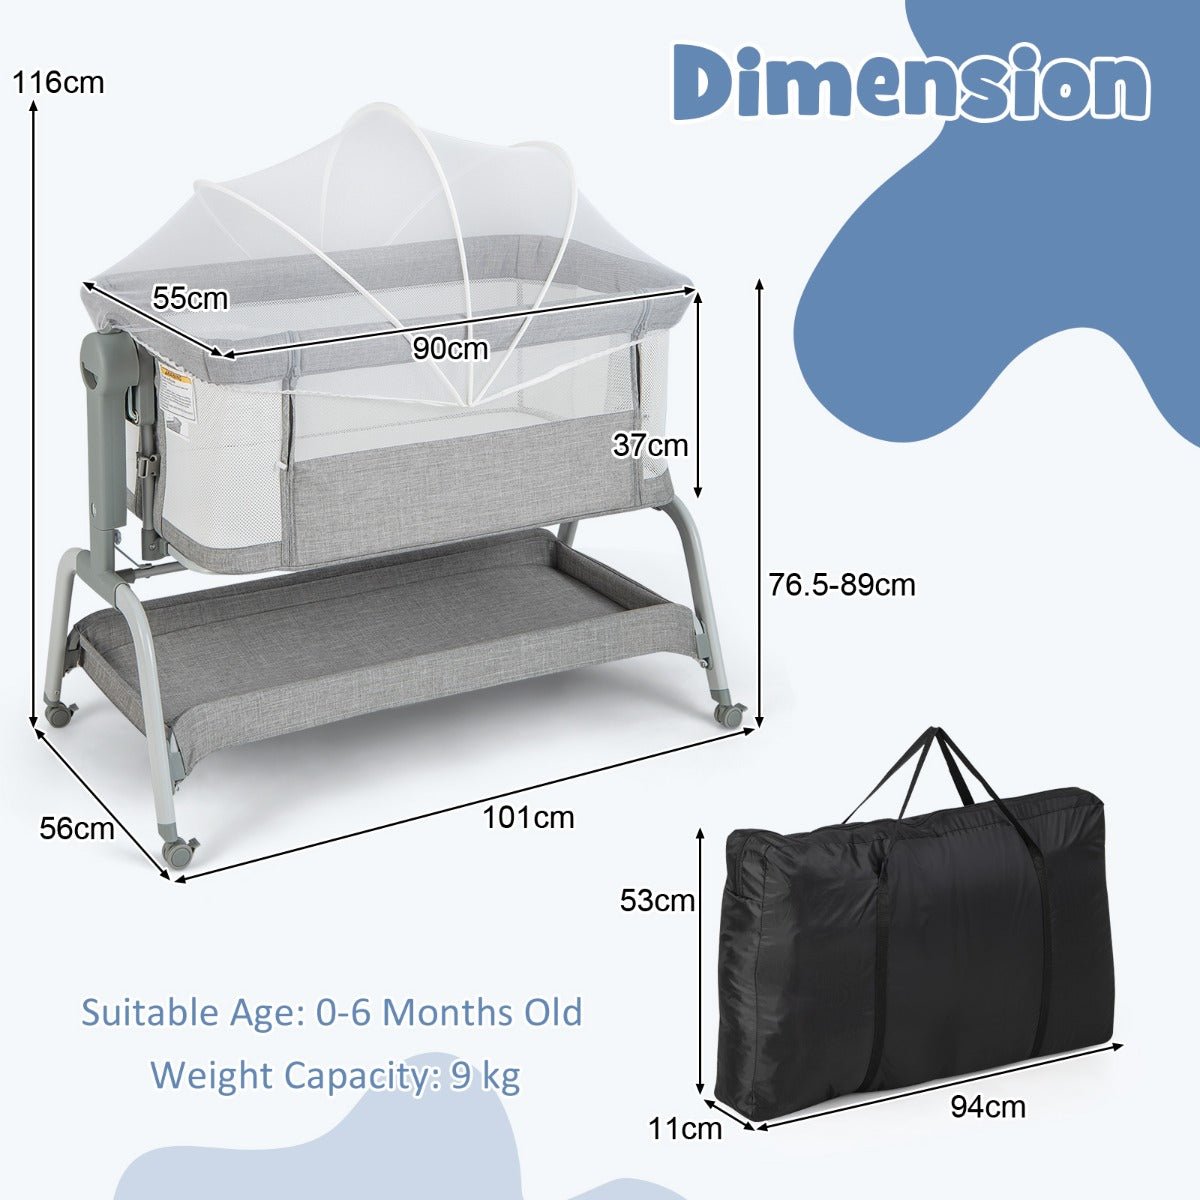 Safe and Adaptable: Grey 3-in-1 Travel Cot for Babies